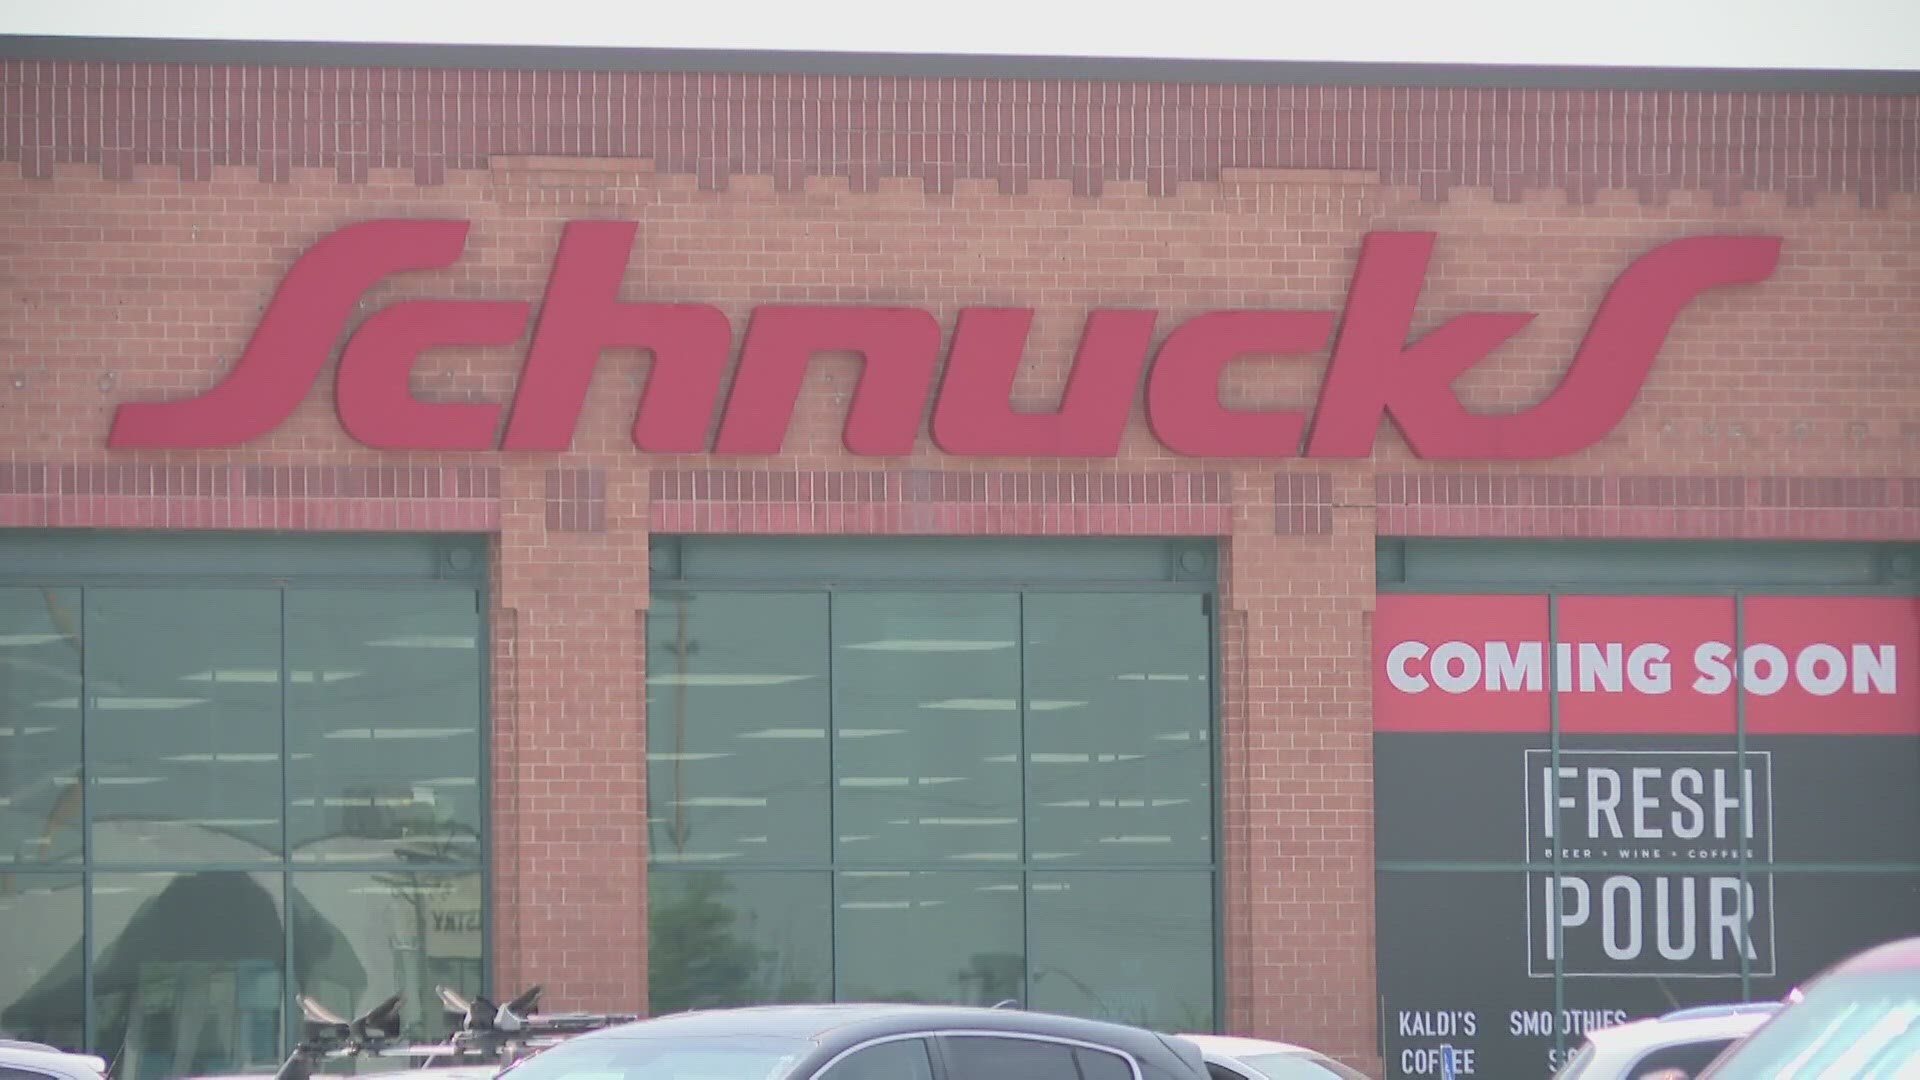 You won't be able to put as much in your basket if you're using the self-checkout at Schnucks. The chain will enforce a 10-item limit starting Feb. 1.